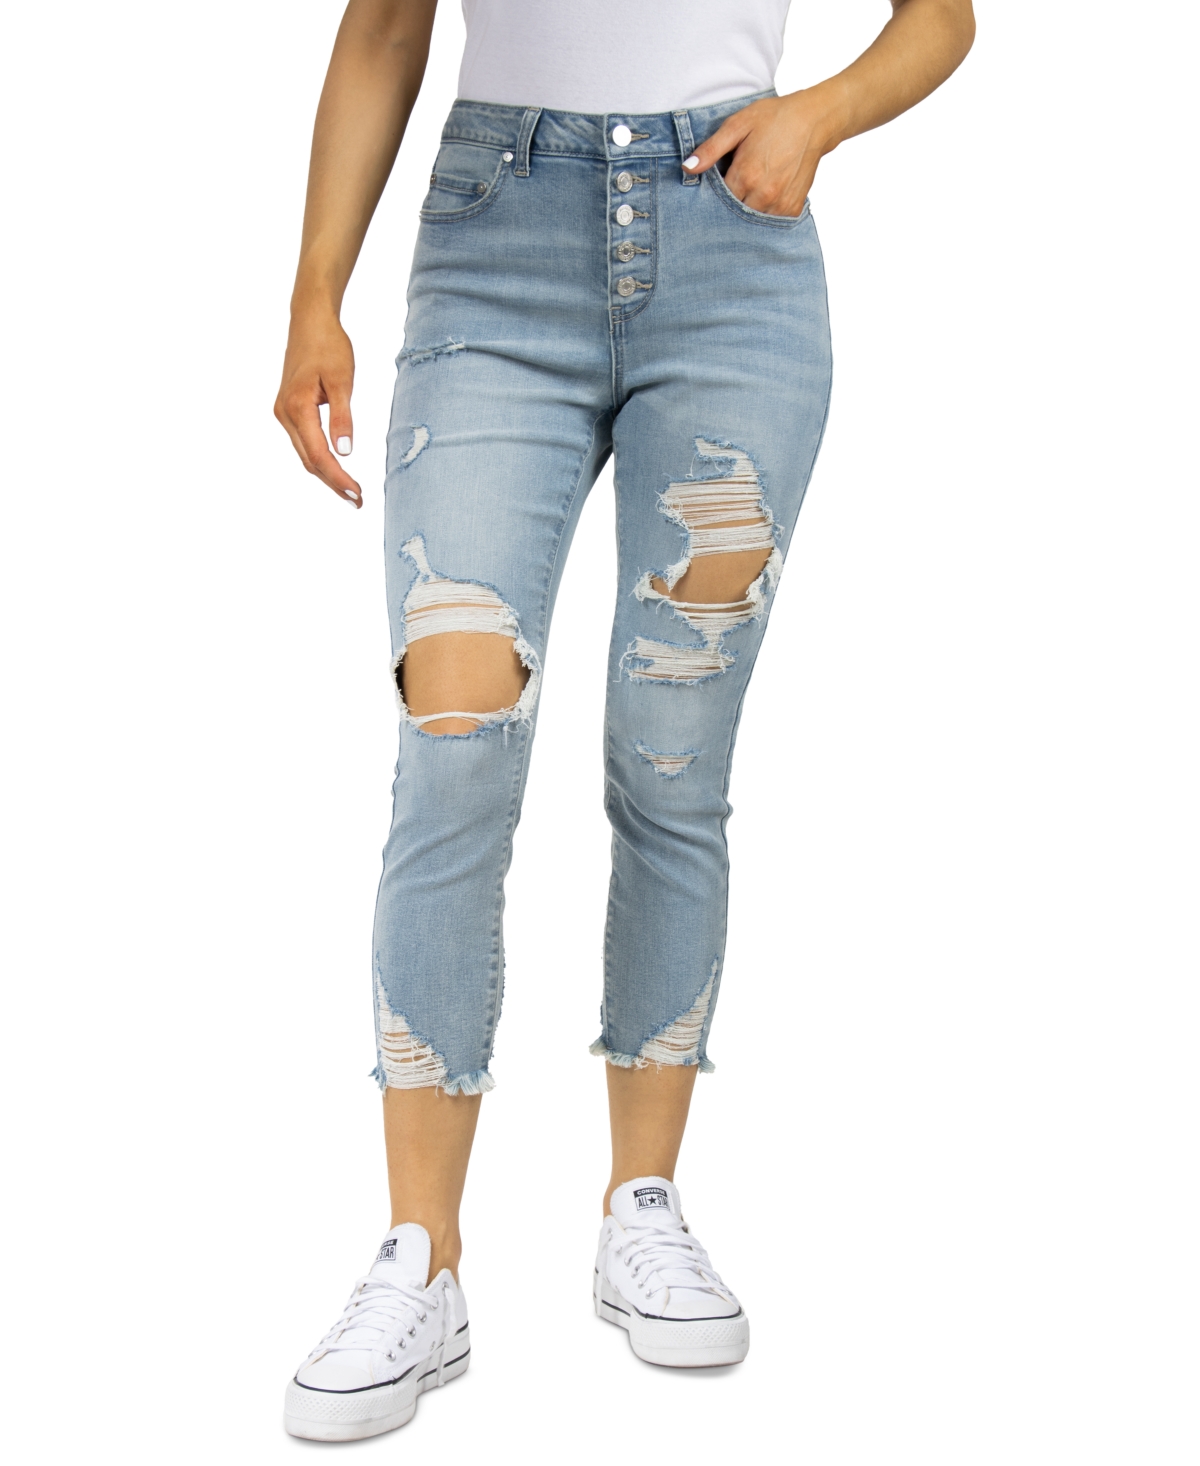 Indigo Rein Juniors' Ripped Cropped Jeans